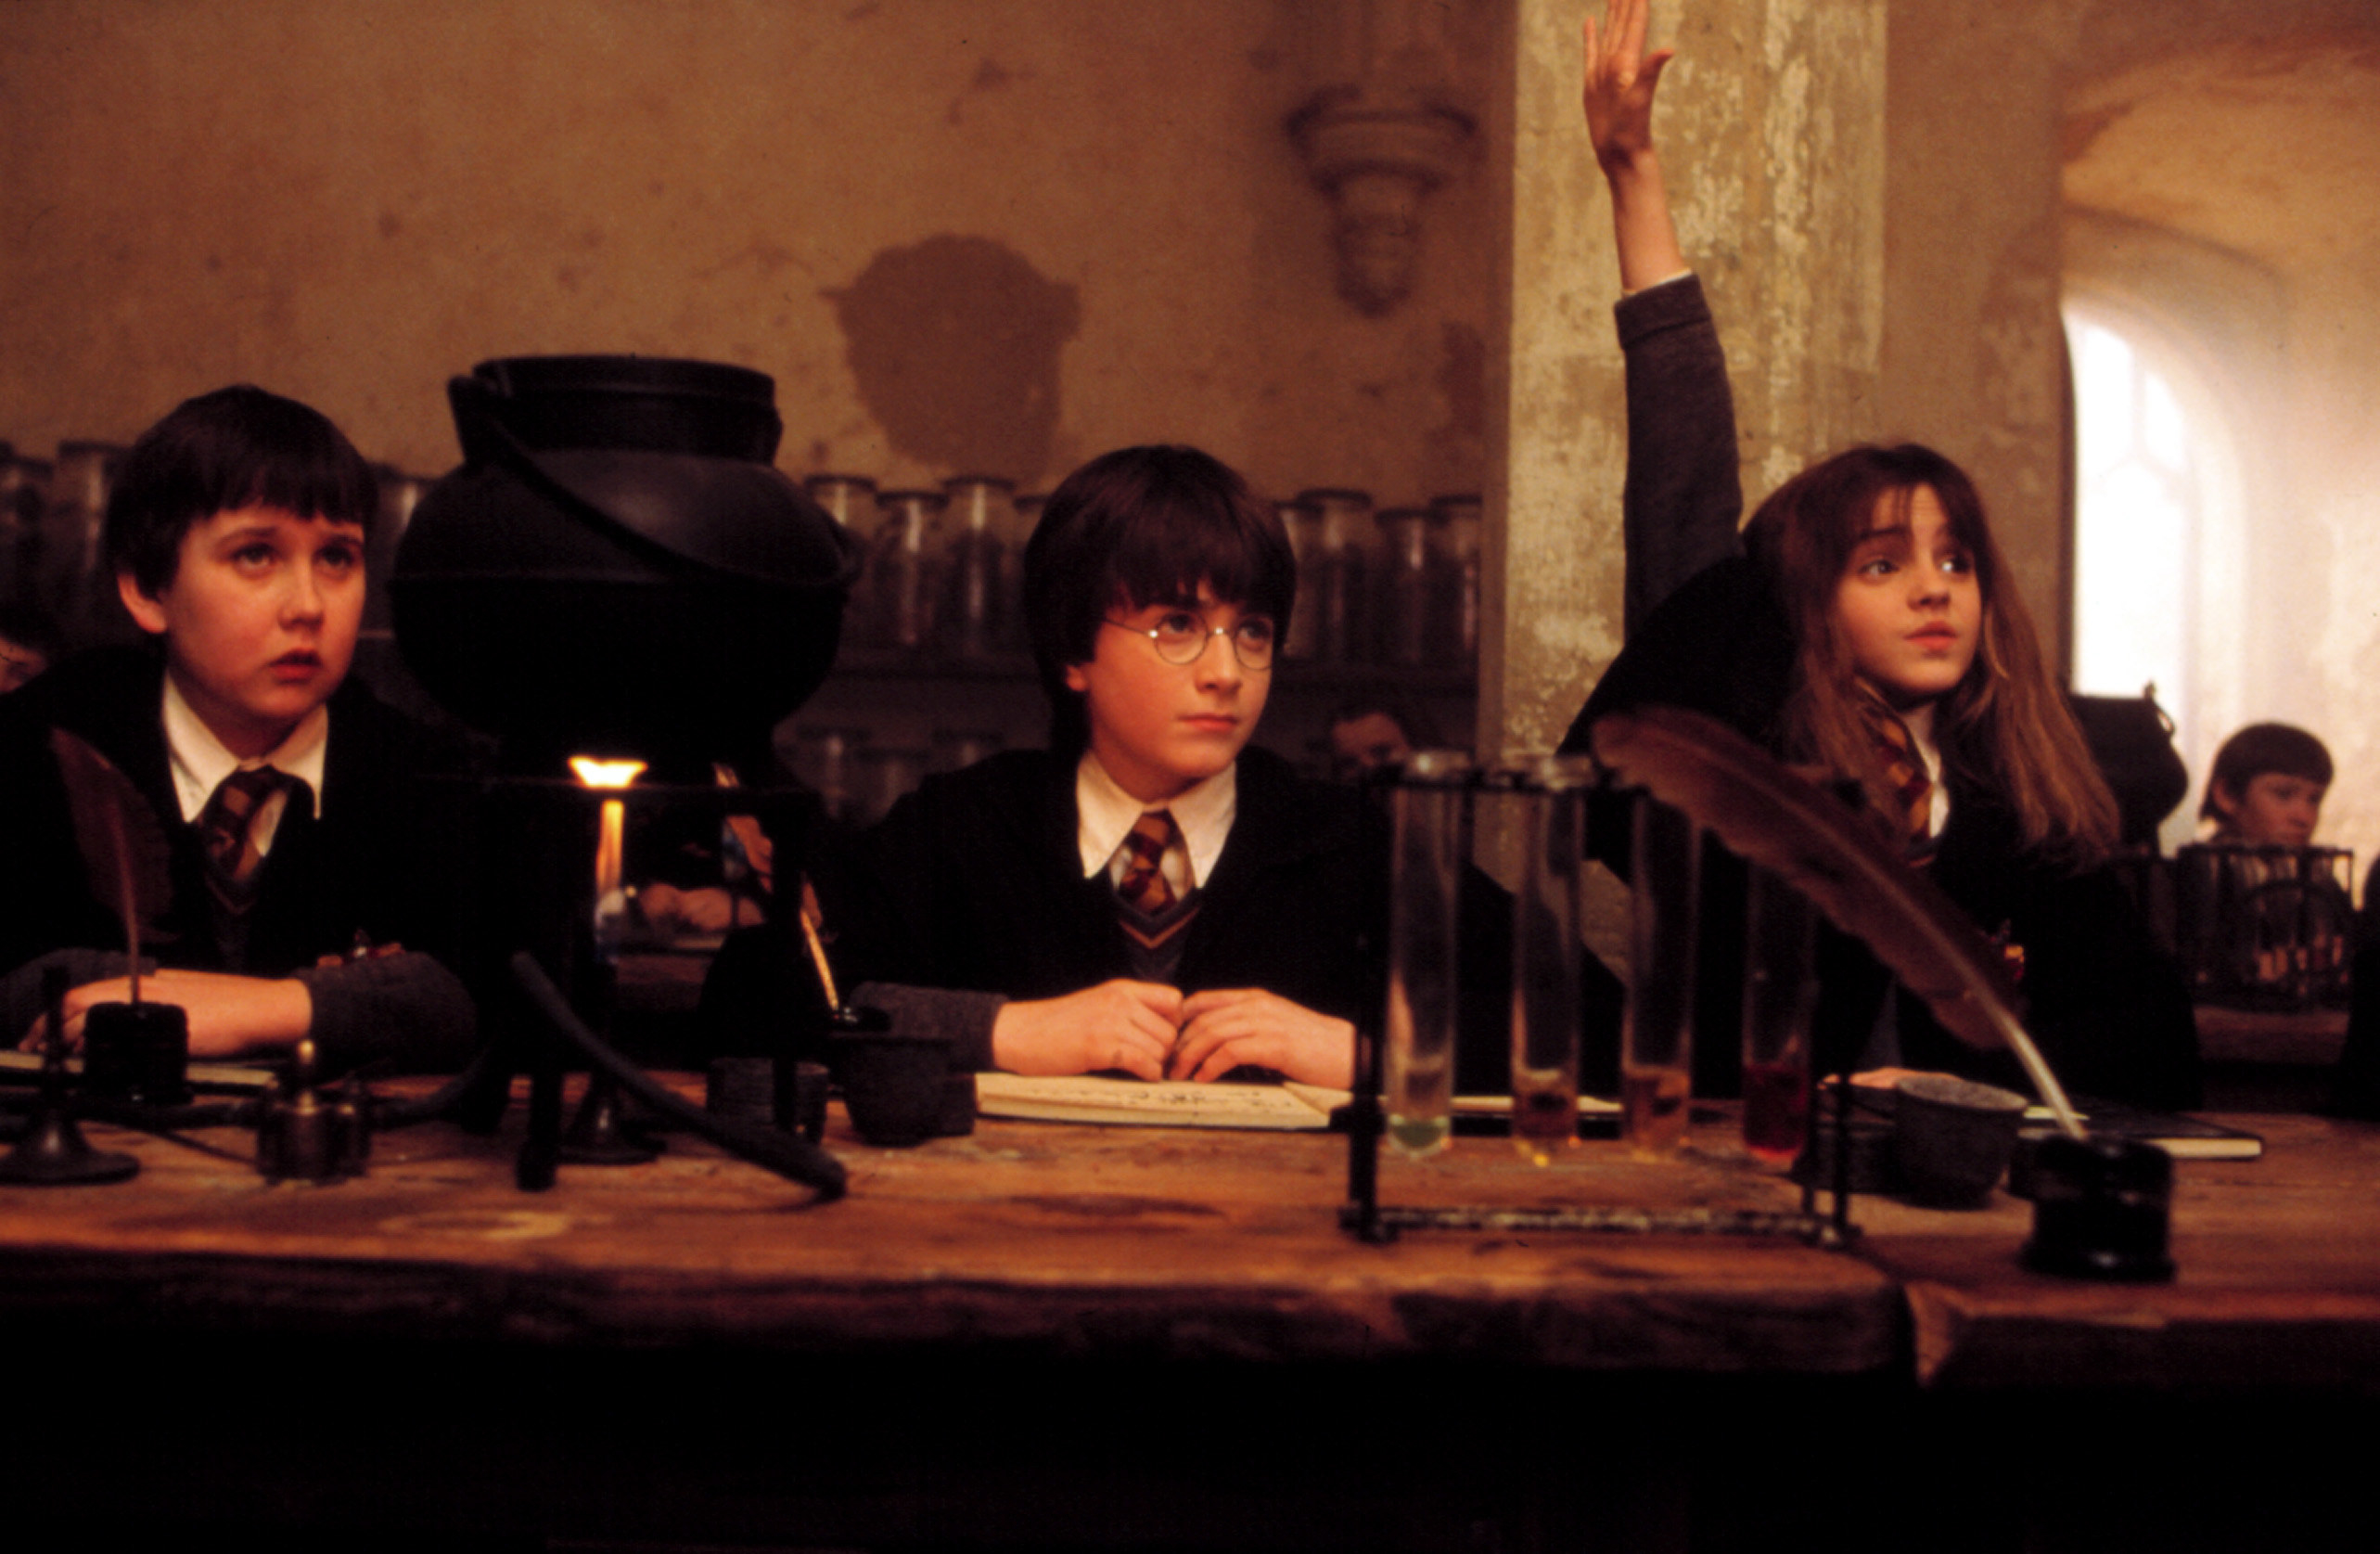 in an early harry potter movie, Hermione raises her hand in class